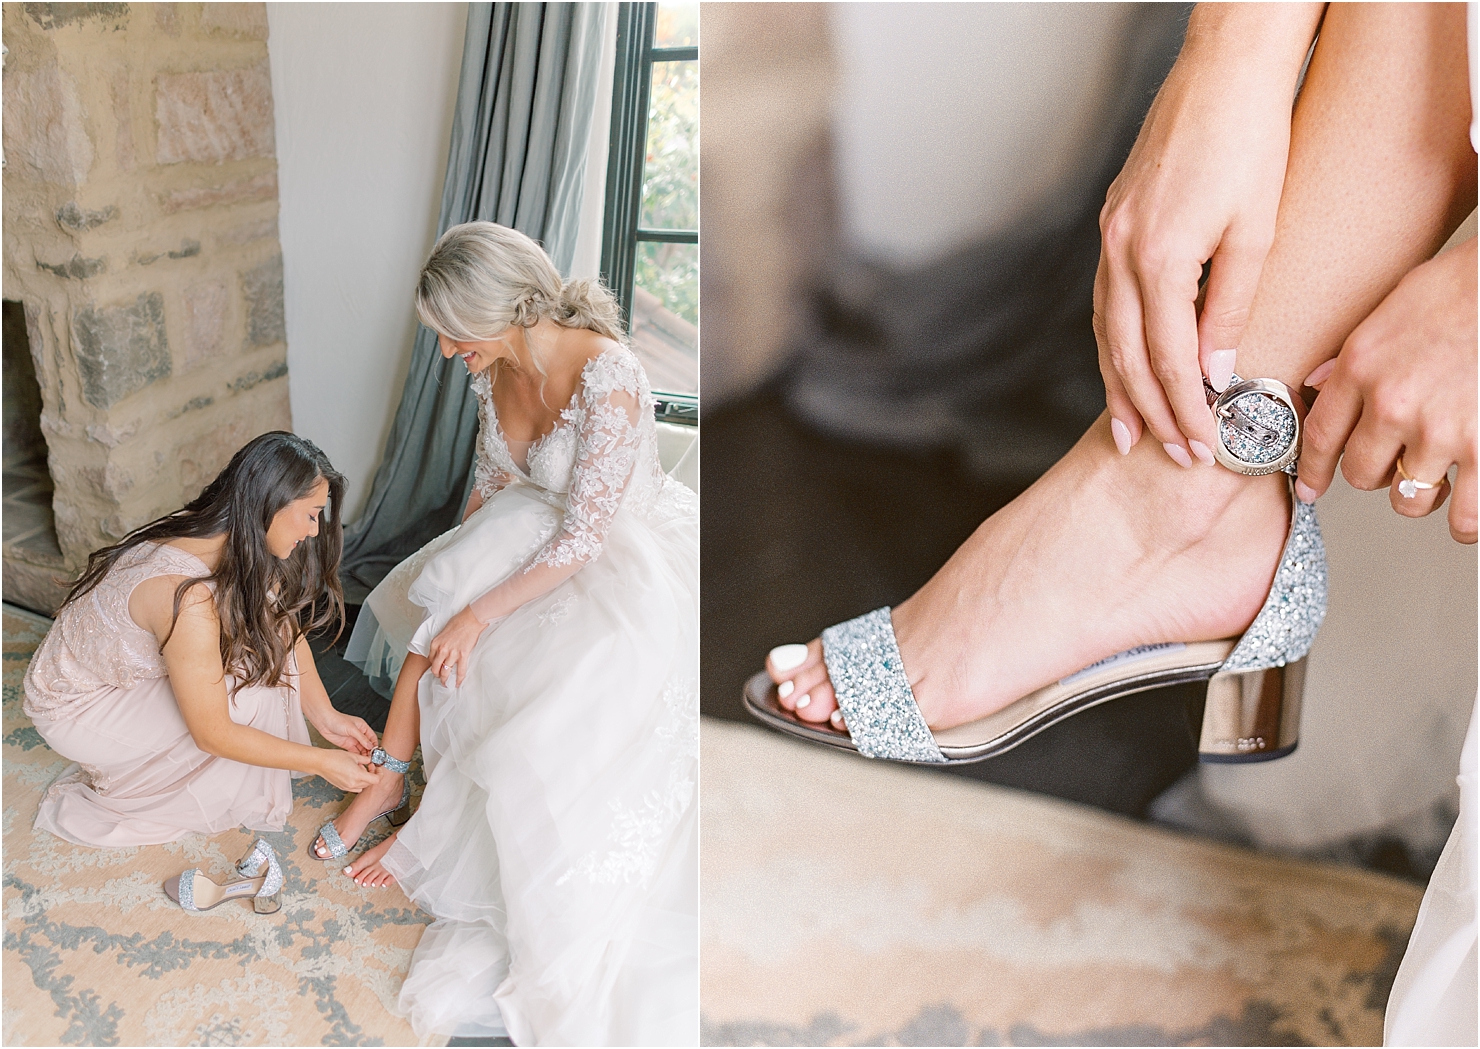 Jimmy Choo Shoes Bridal Suite Getting Ready Chateau Selah Madeline Trent Romantic Wedding Photographer